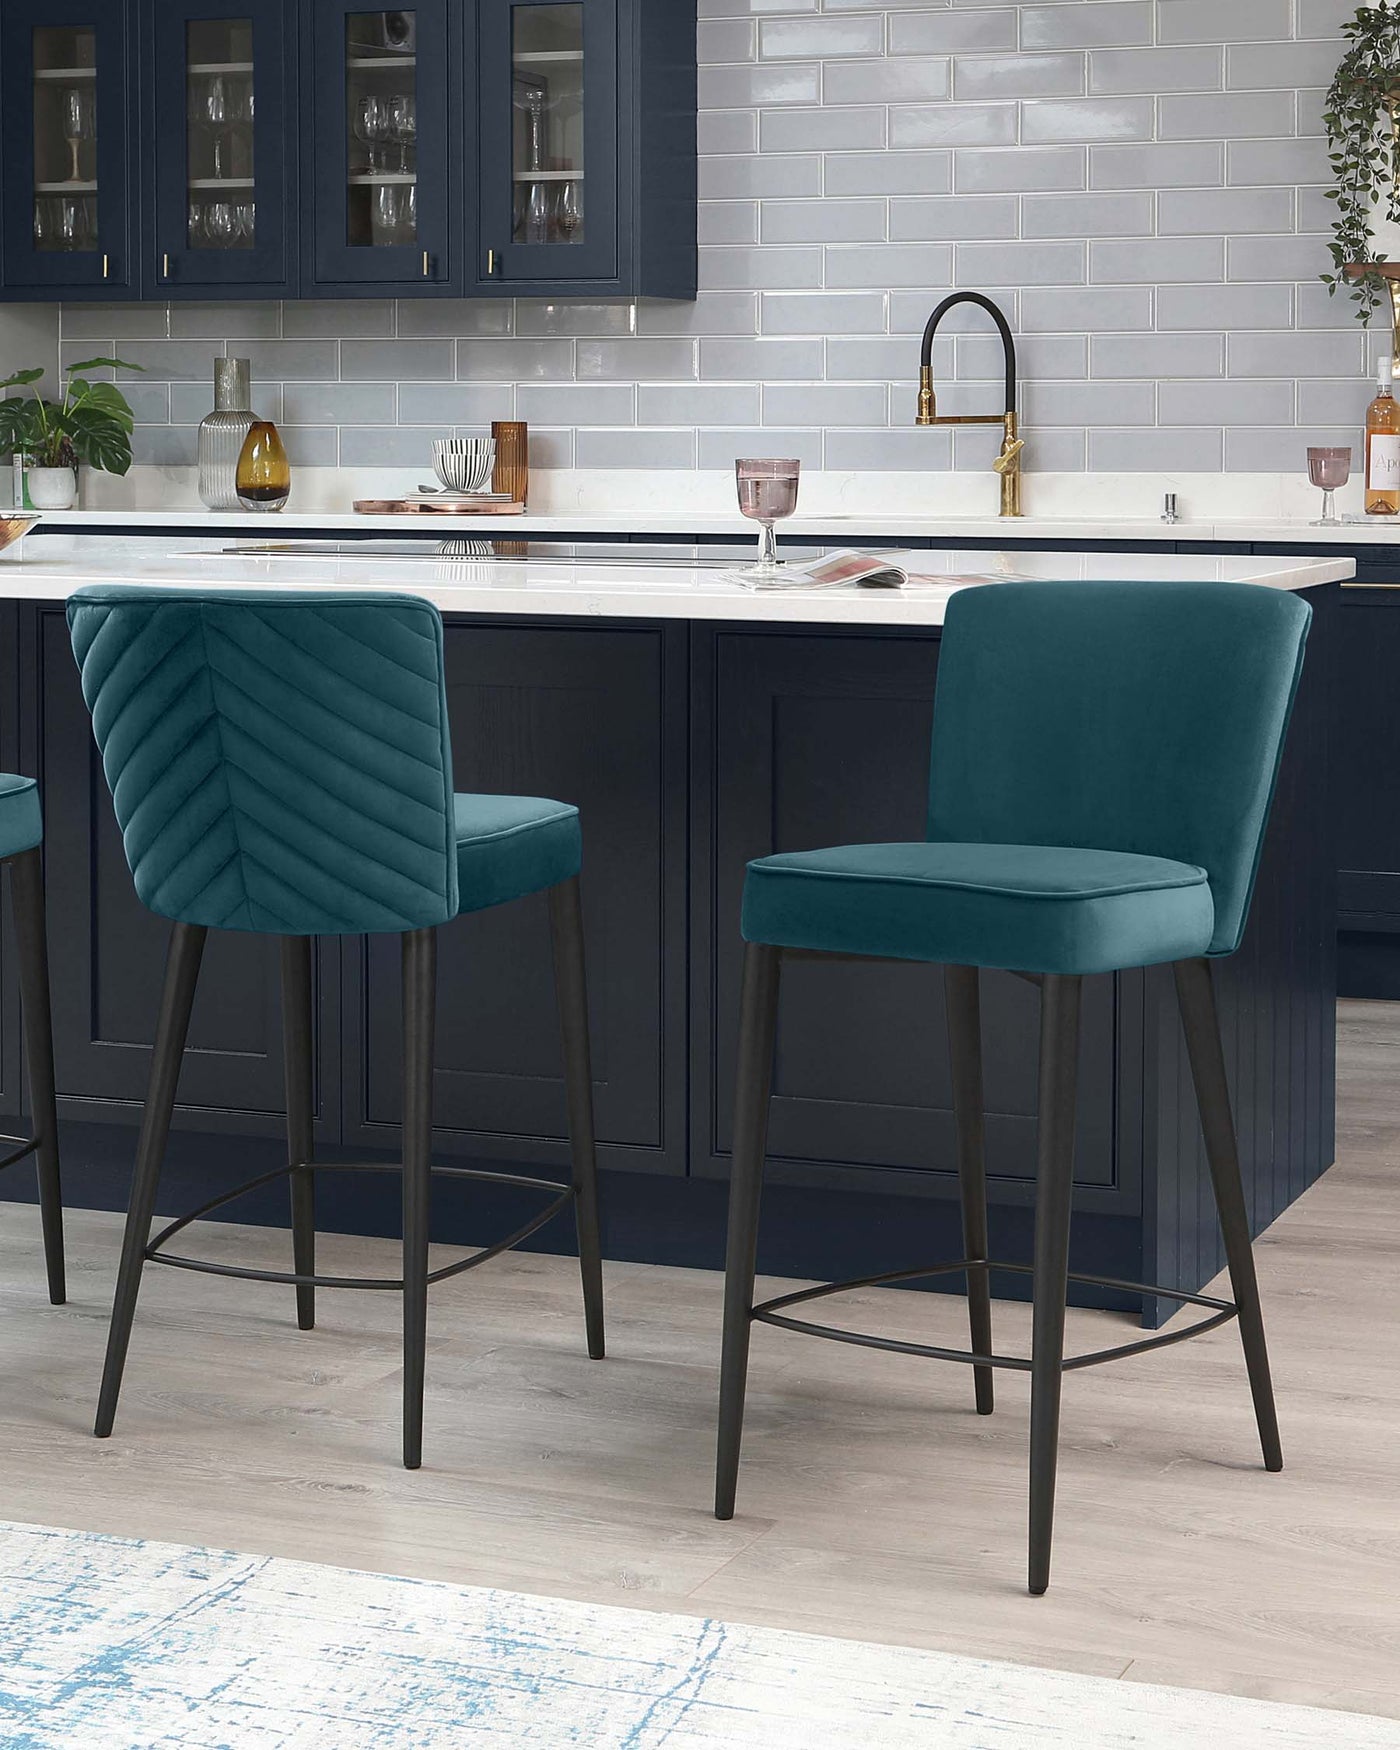 Two elegant teal blue bar stools with quilted velvet upholstery and sleek metallic legs placed against a modern kitchen island.